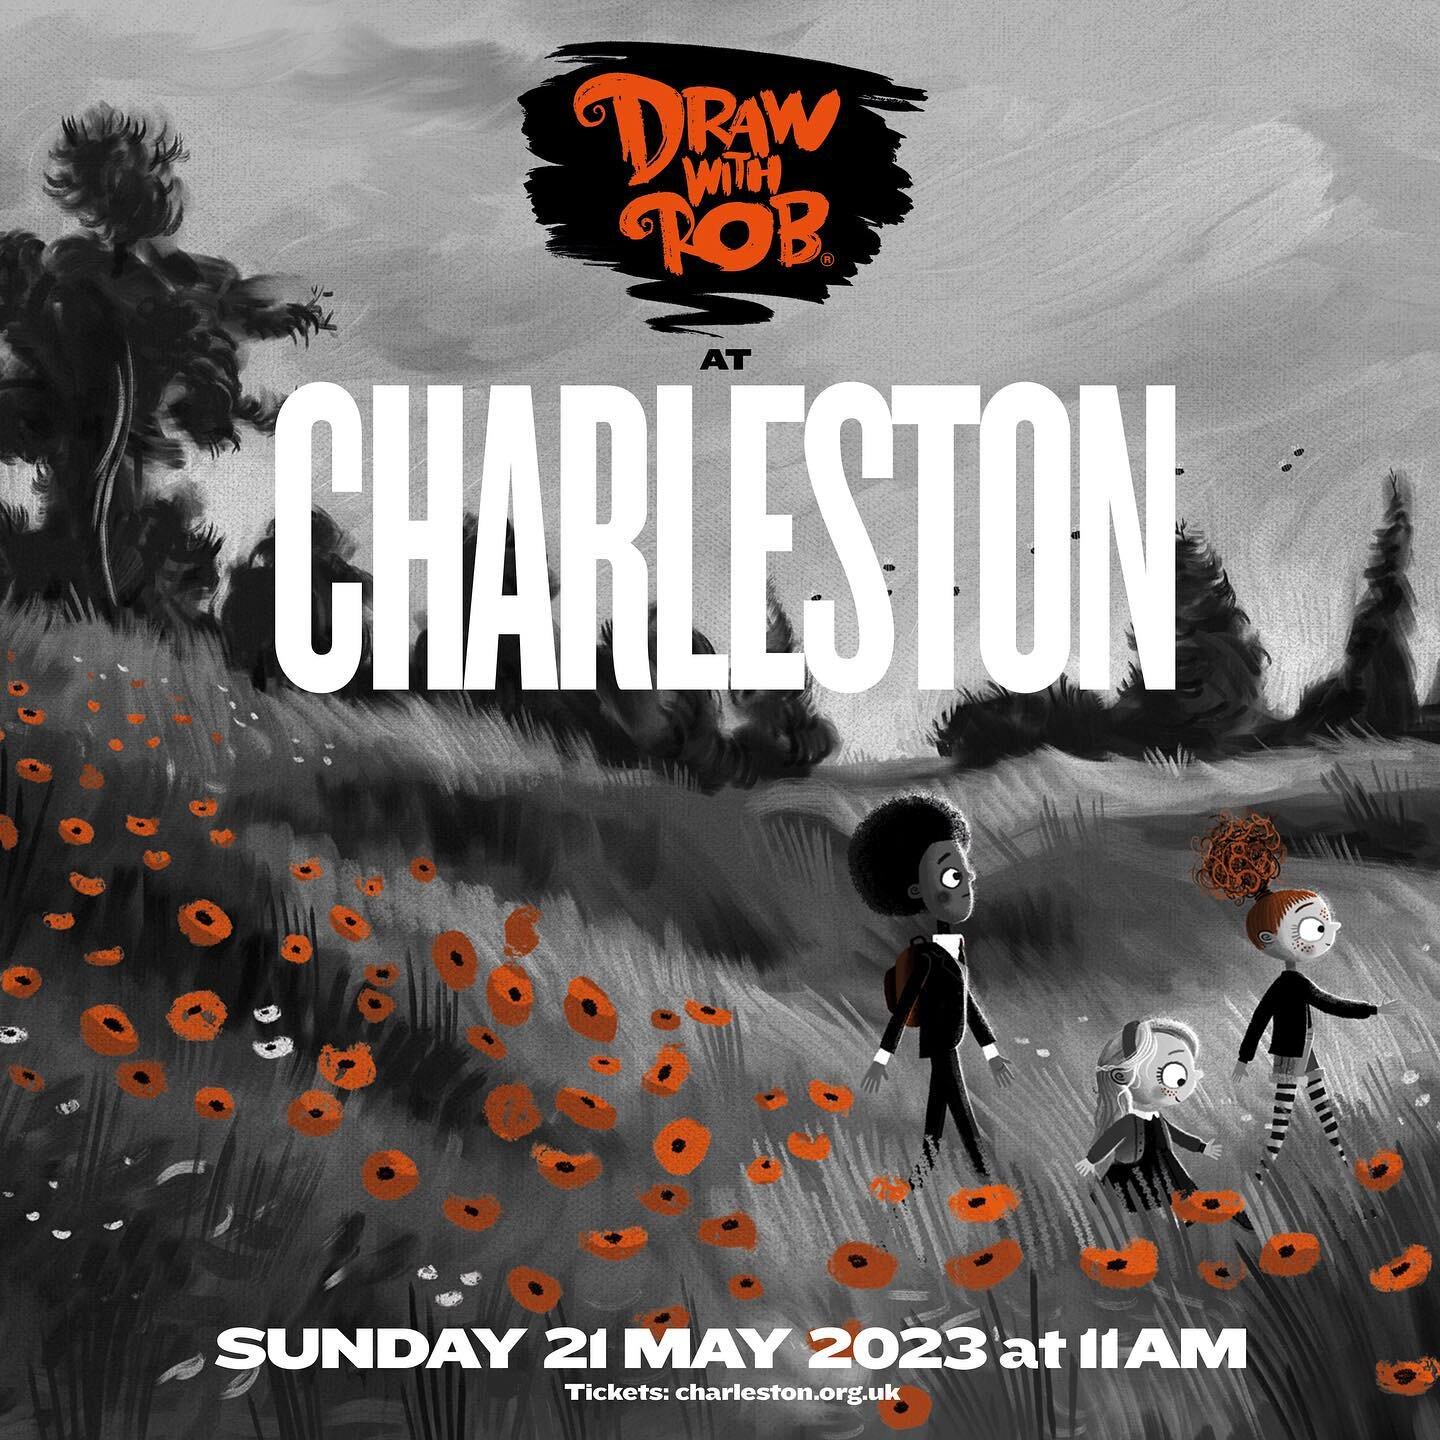 I am delighted to announce that I'll be appearing at the Charleston Festival on Sunday 21 May. My grandparents lived nearby so it's always lovely to visit beautiful Sussex, and Charleston House is the perfect setting for a literary festival. Can't wa